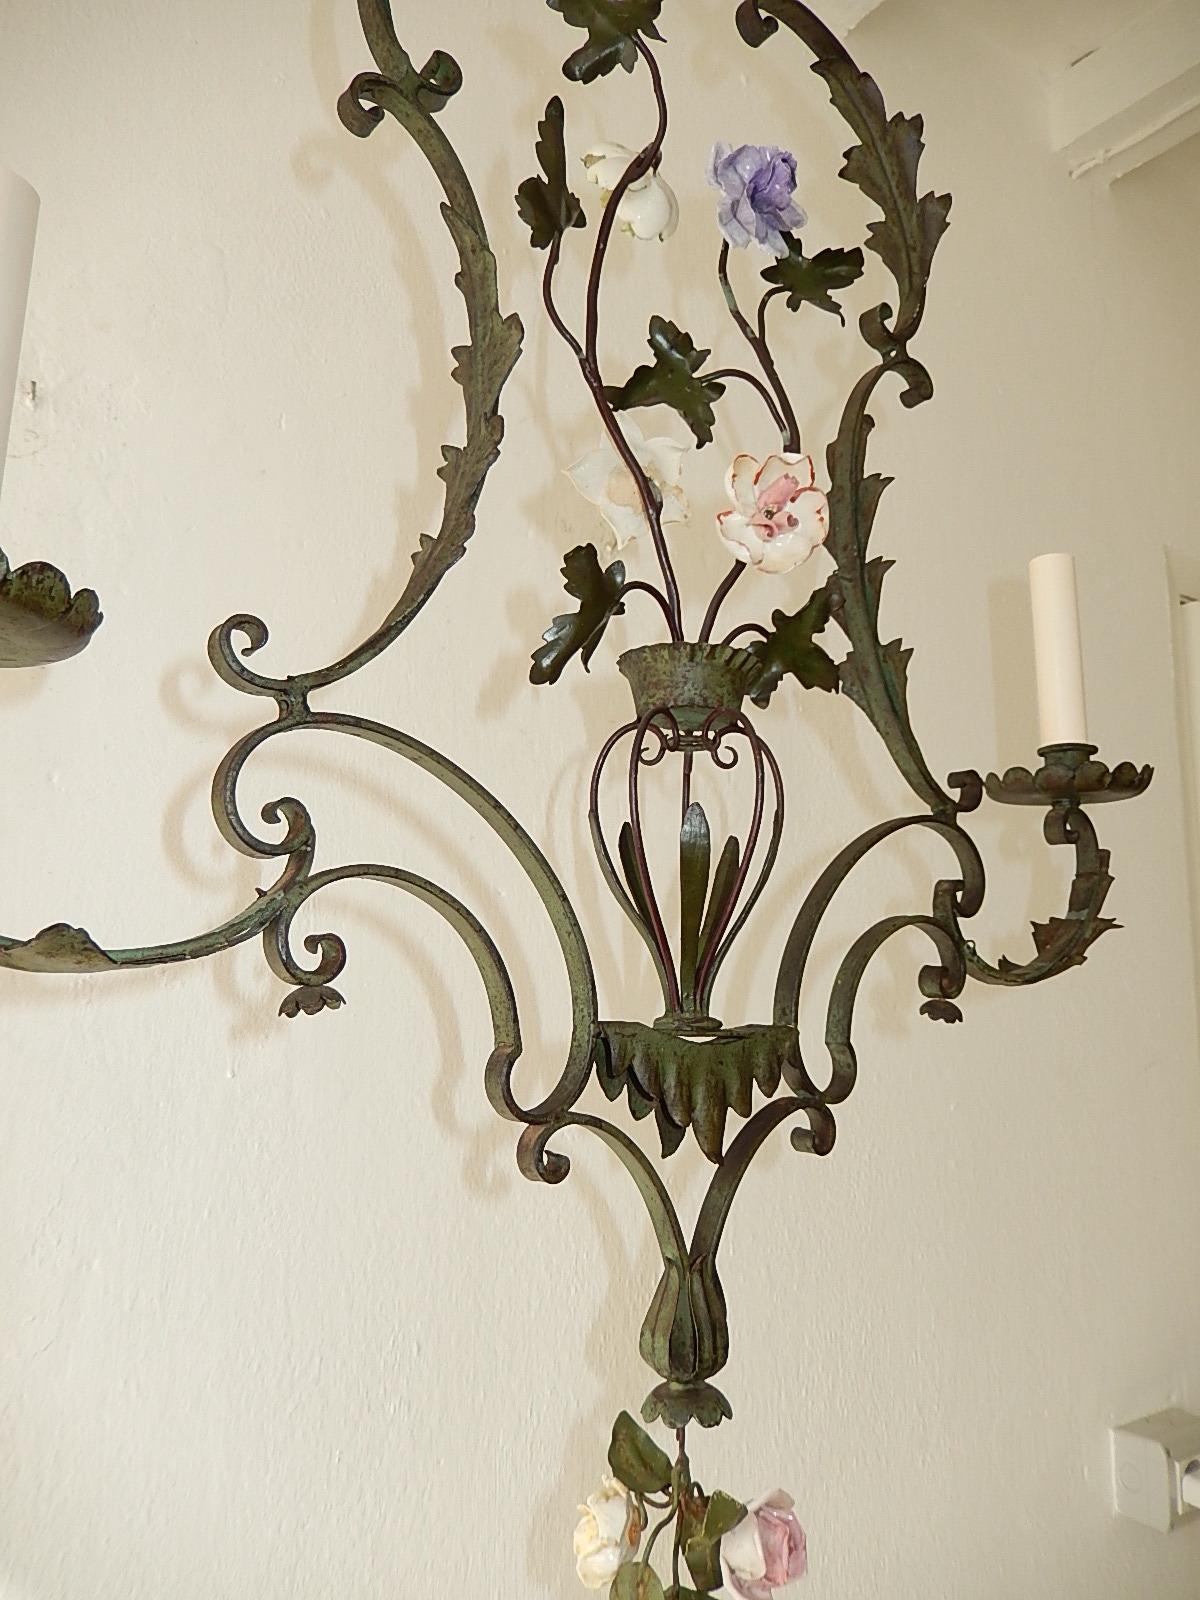 Housing 2 lights. Hand forged wrought iron one of a kind with handmade porcelain flowers. Chandelier is darker then it shows in the photos. Photo number 2 shows the closest of the true color in person. Also adorning a tassel of roses as finial. Look